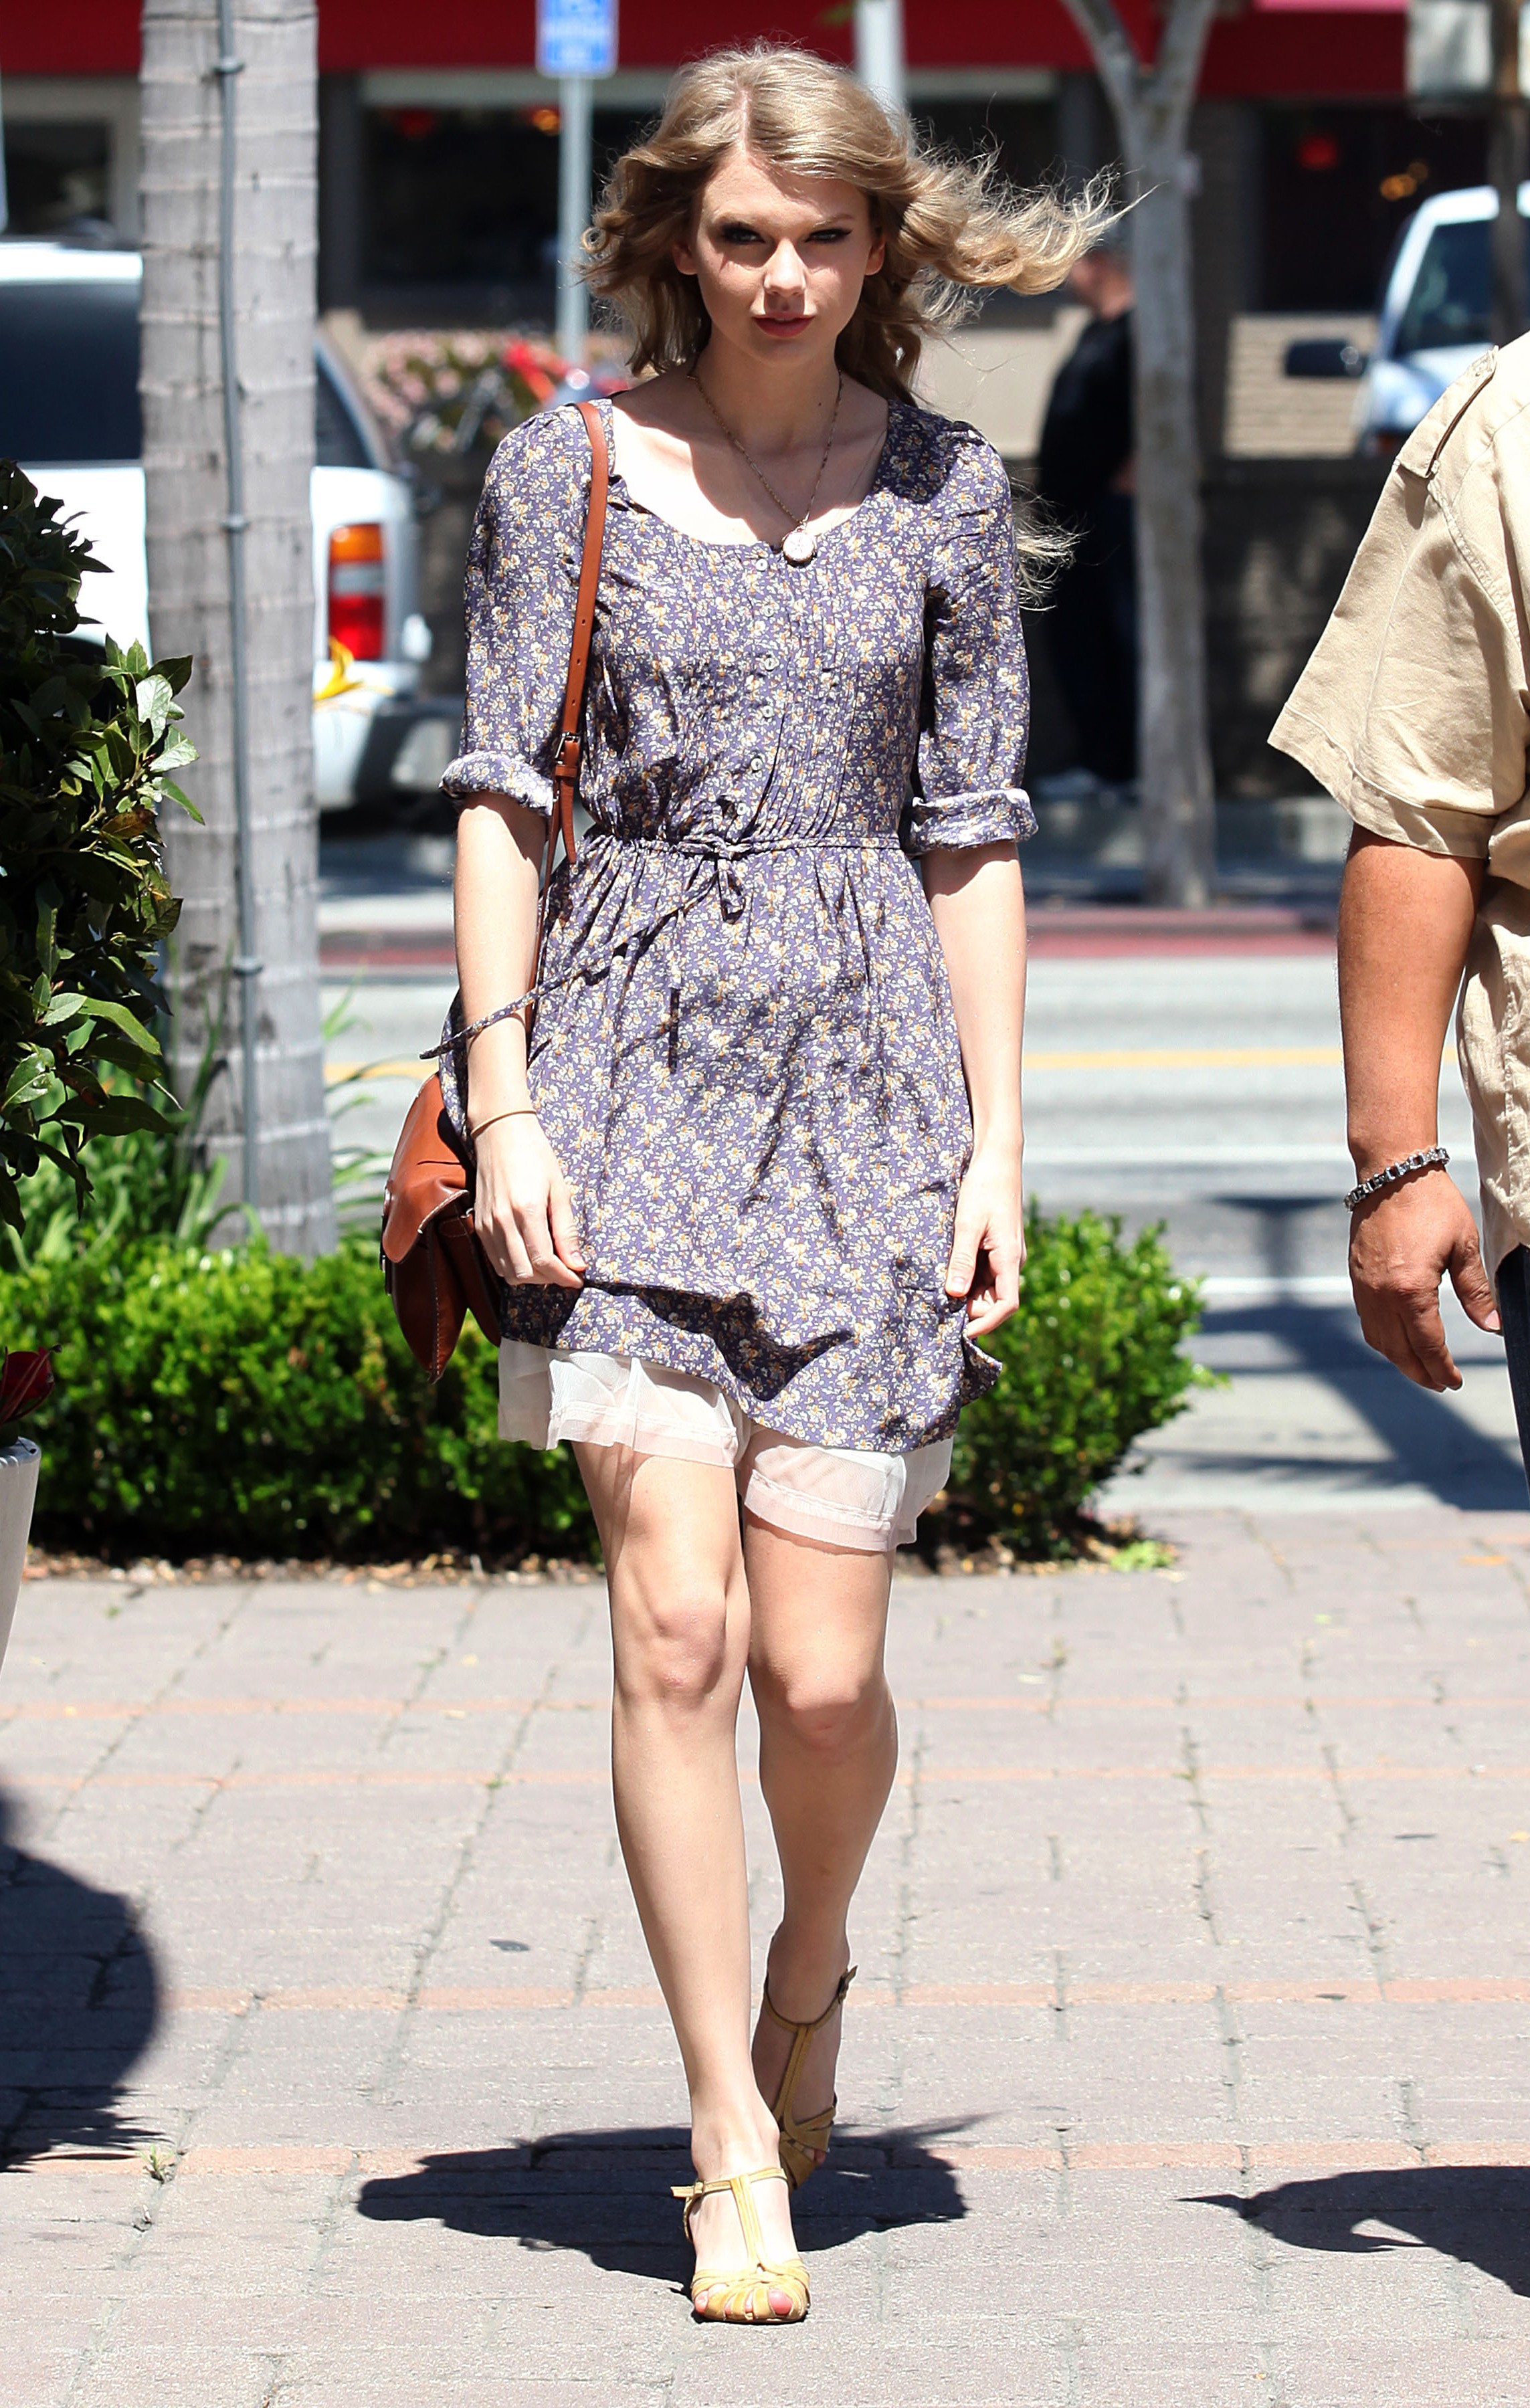 Taylor Swift Shopping At Target, California April 4, 2011 | TAYLOR SWIFT INDONESIA